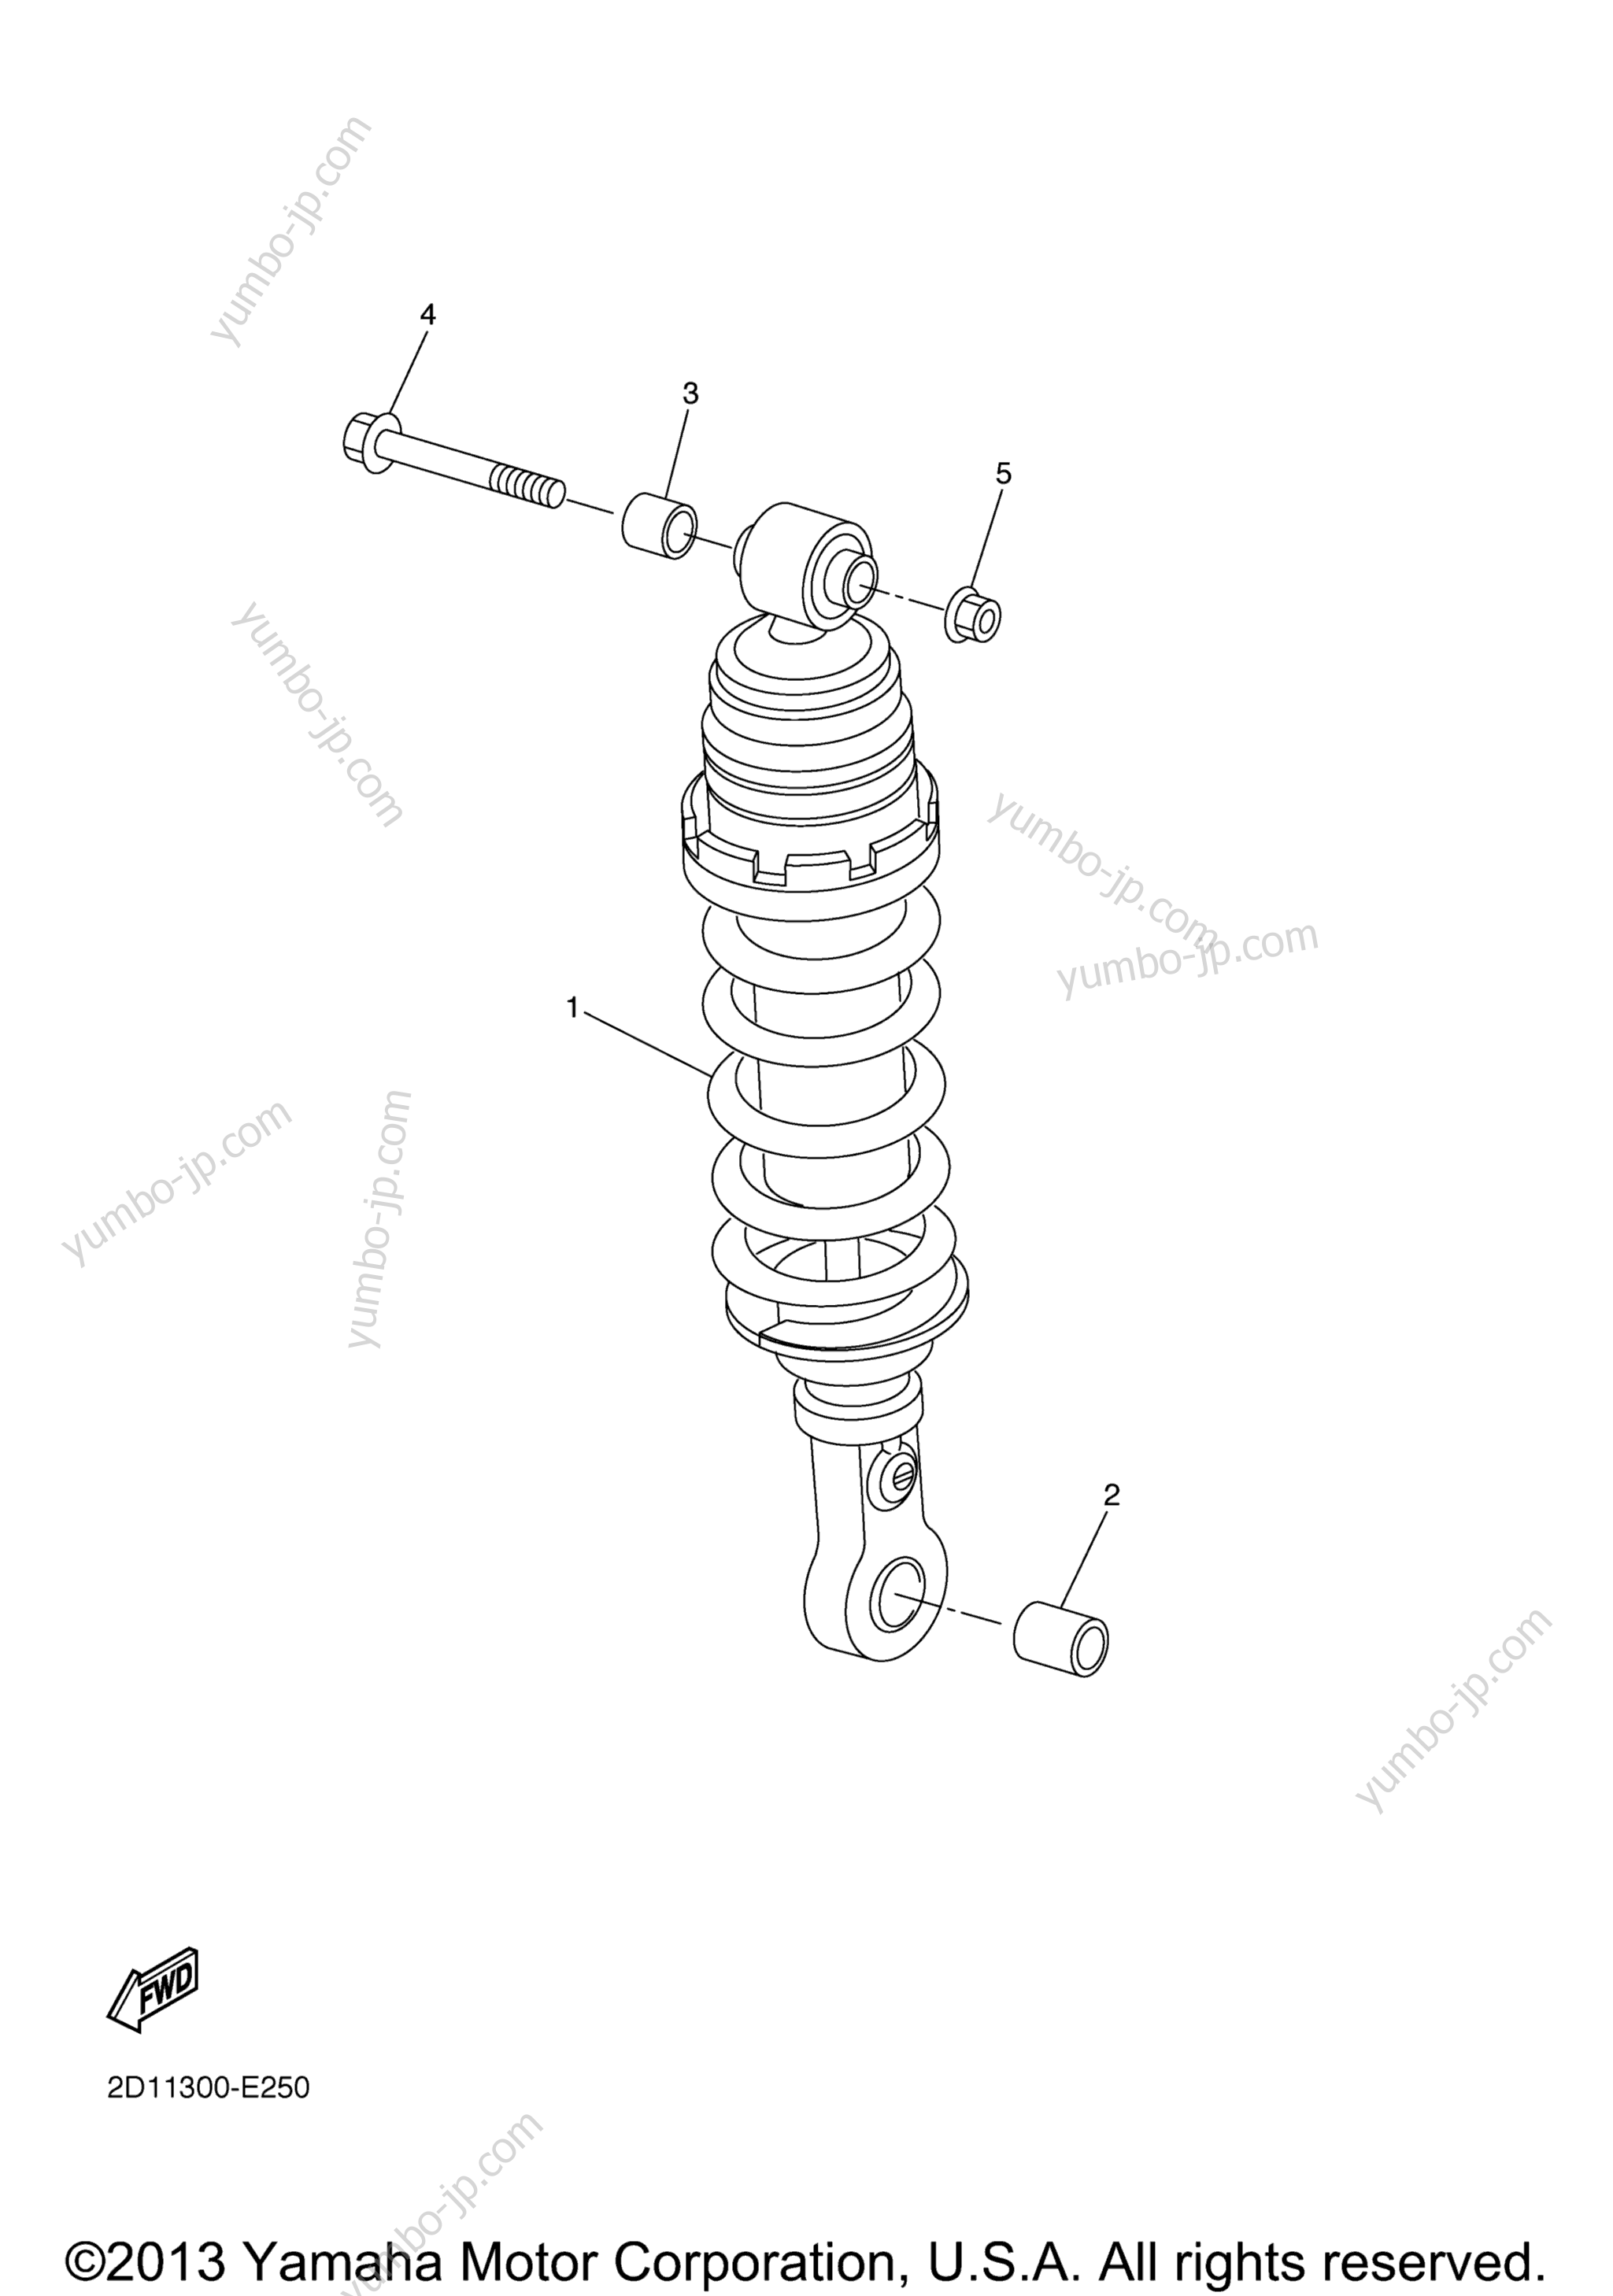 Rear Suspension for motorcycles YAMAHA FZ-1 CA (FZS10VC) CA 2006 year